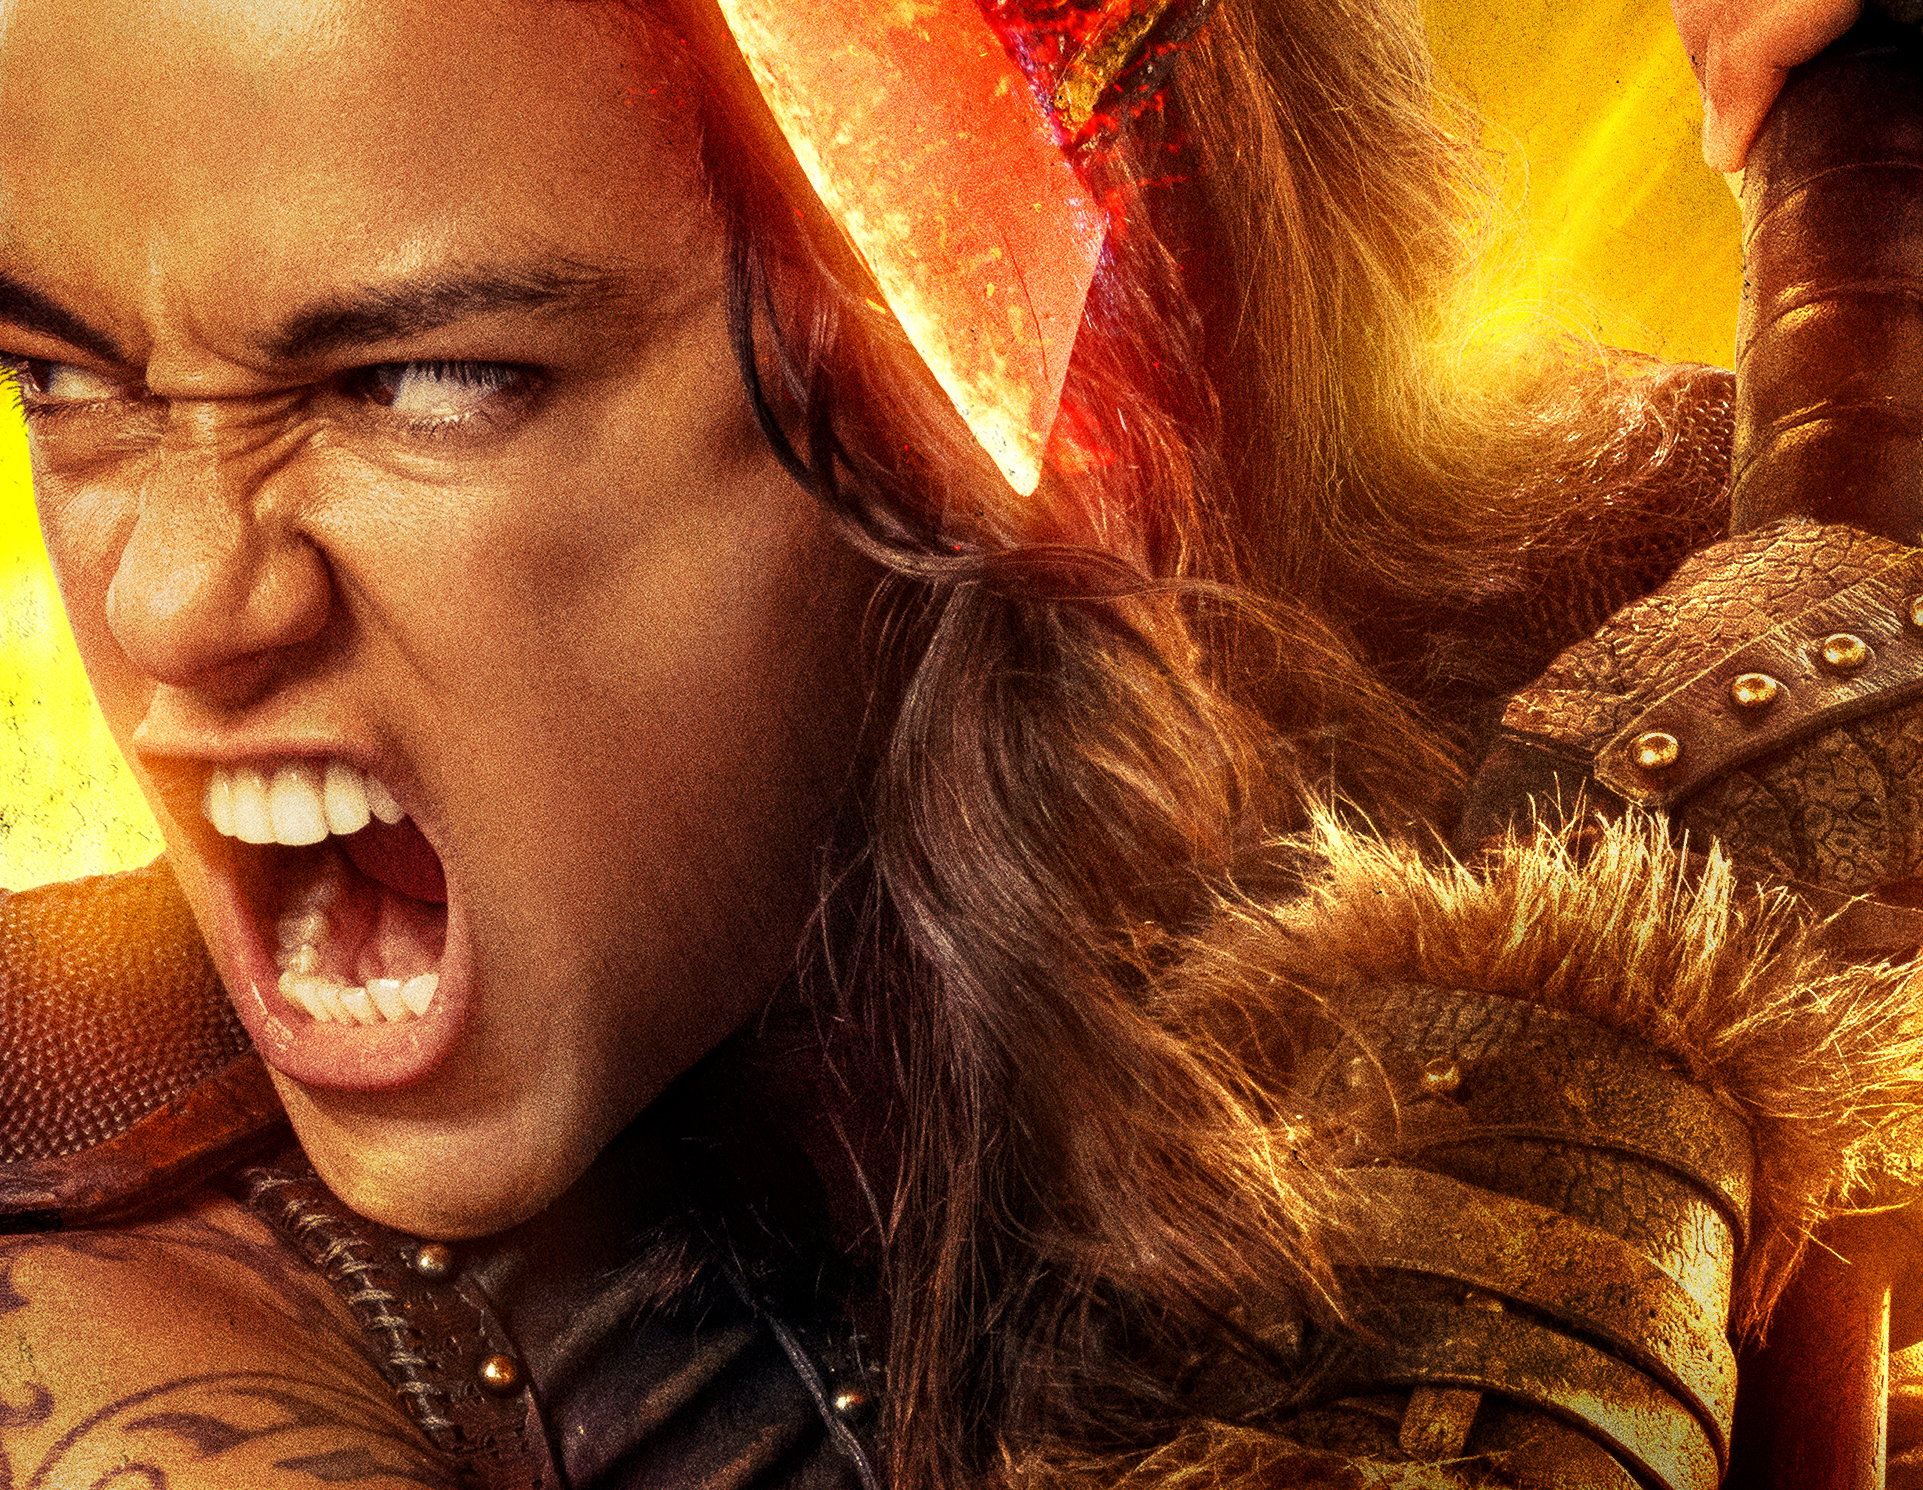 Michelle Rodriguez in Dungeons & Dragons: Honor Among Thieves